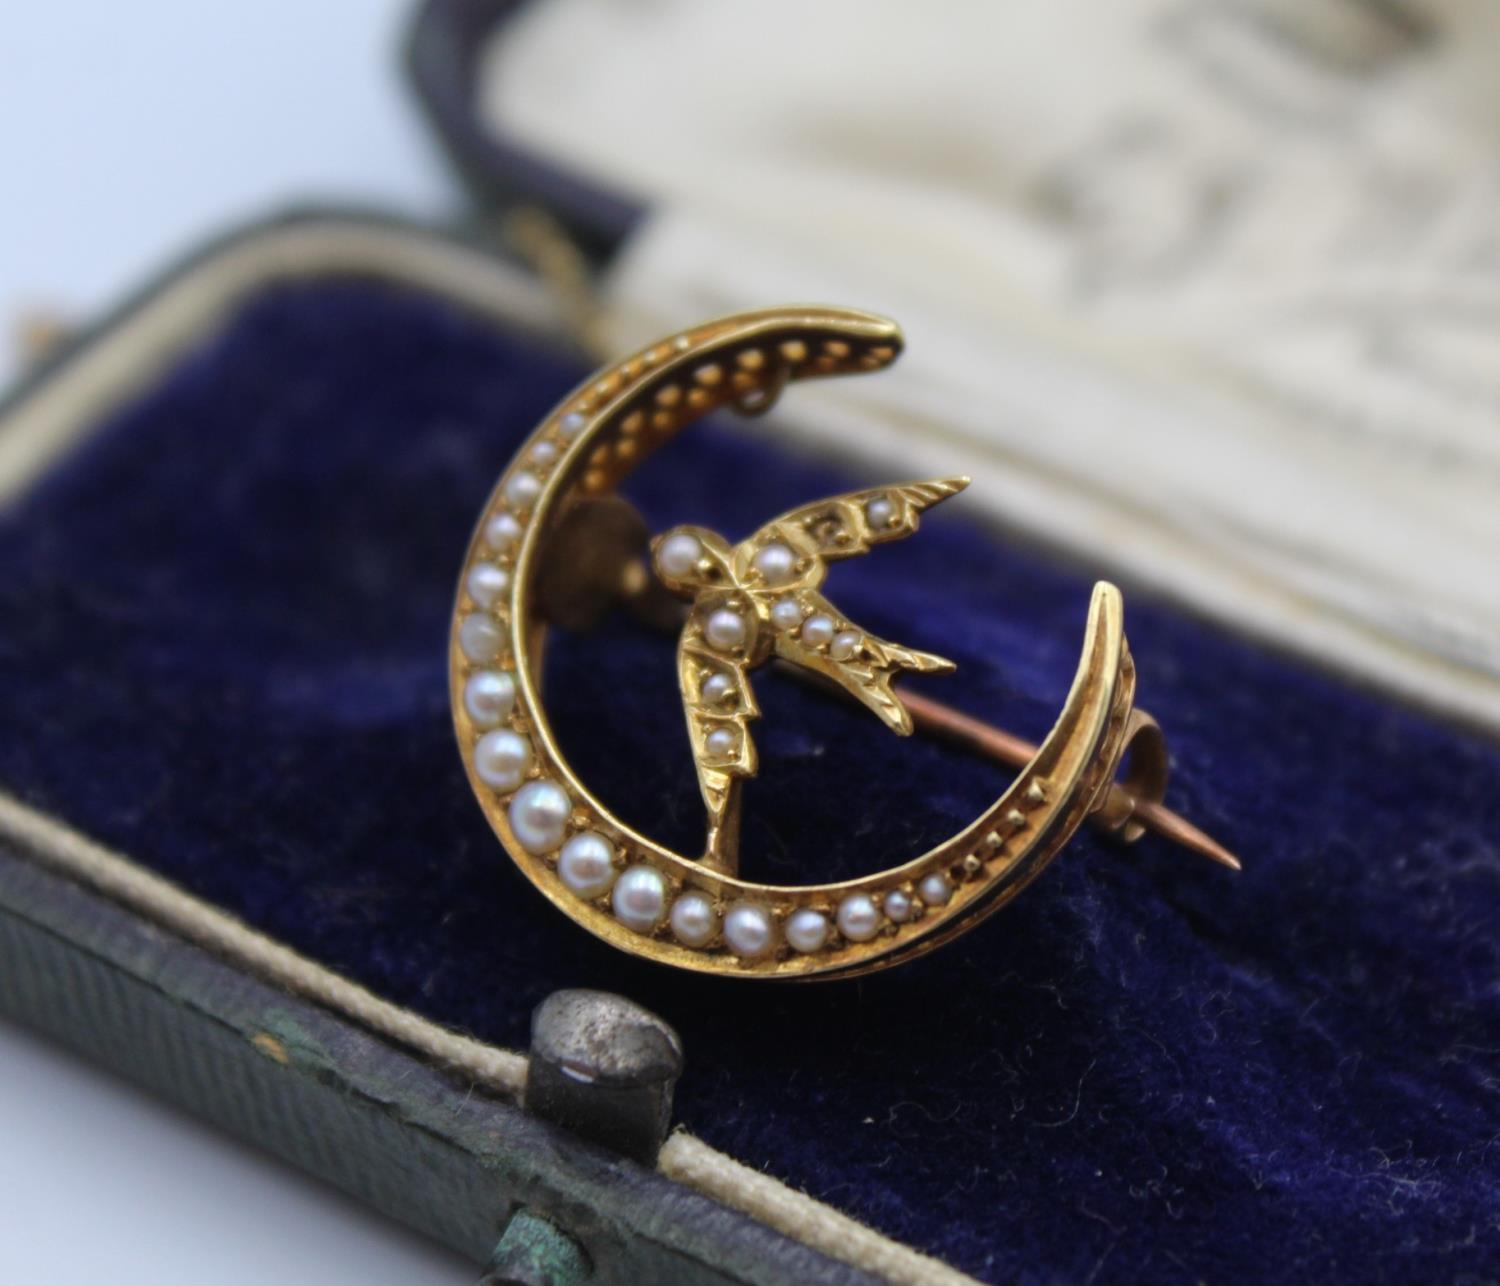 A Victorian 15ct gold and half pearl brooch, Chester hallmark, no date letter, in the form of a - Image 2 of 5